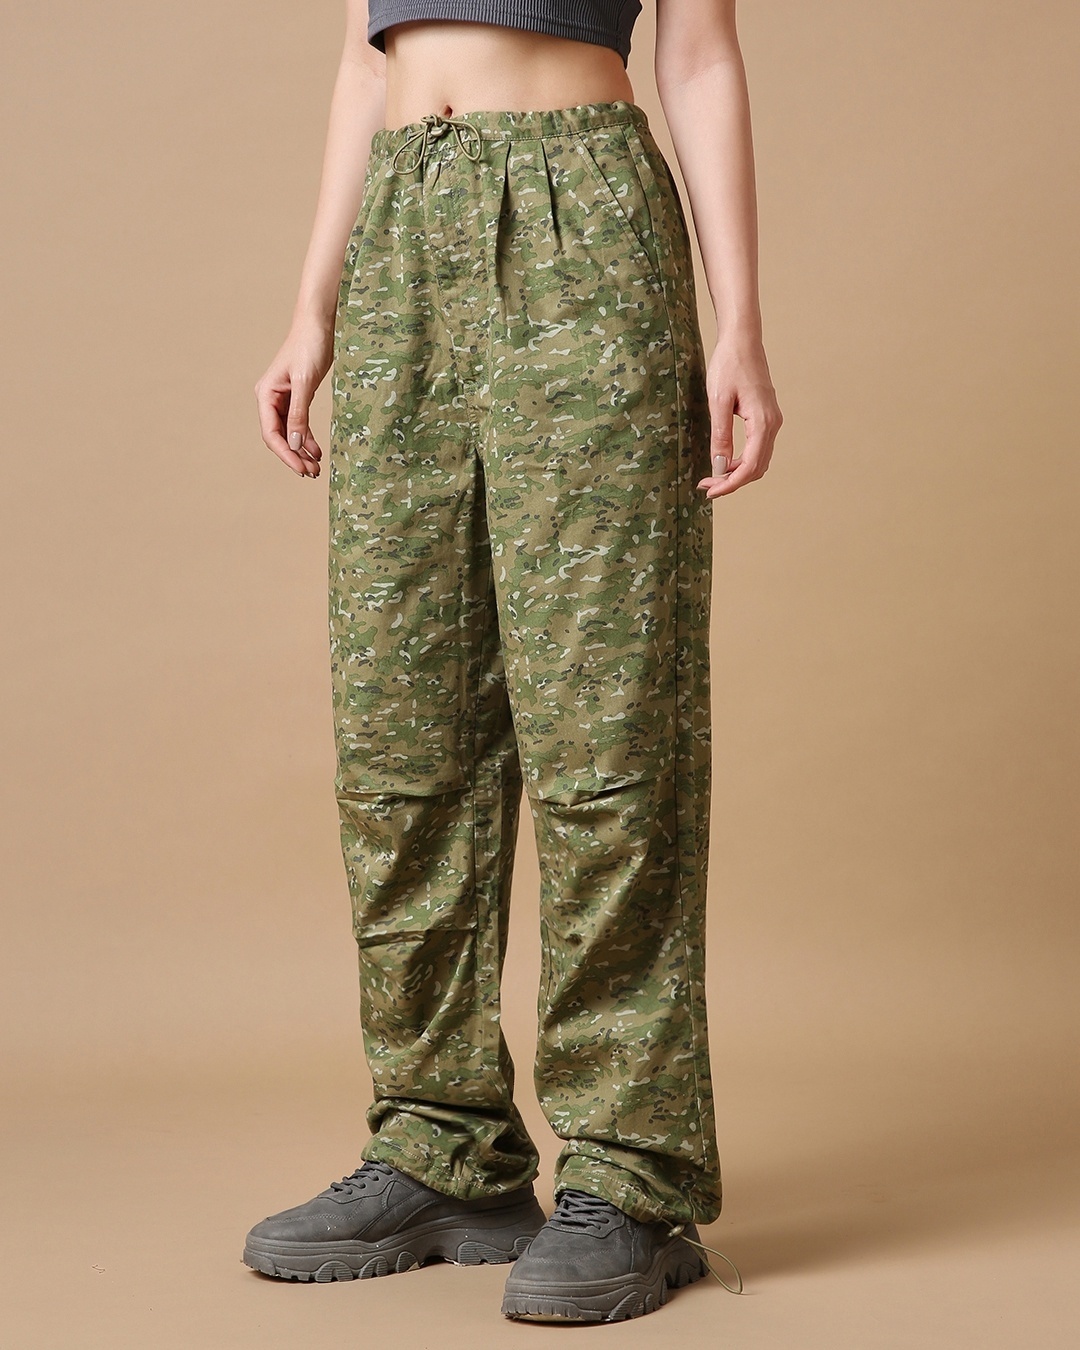 Buy Womens Cargo Work Pants Casual Military Camo Army Combat Trousers with  Pockets, Camo 169, 2 at Amazon.in